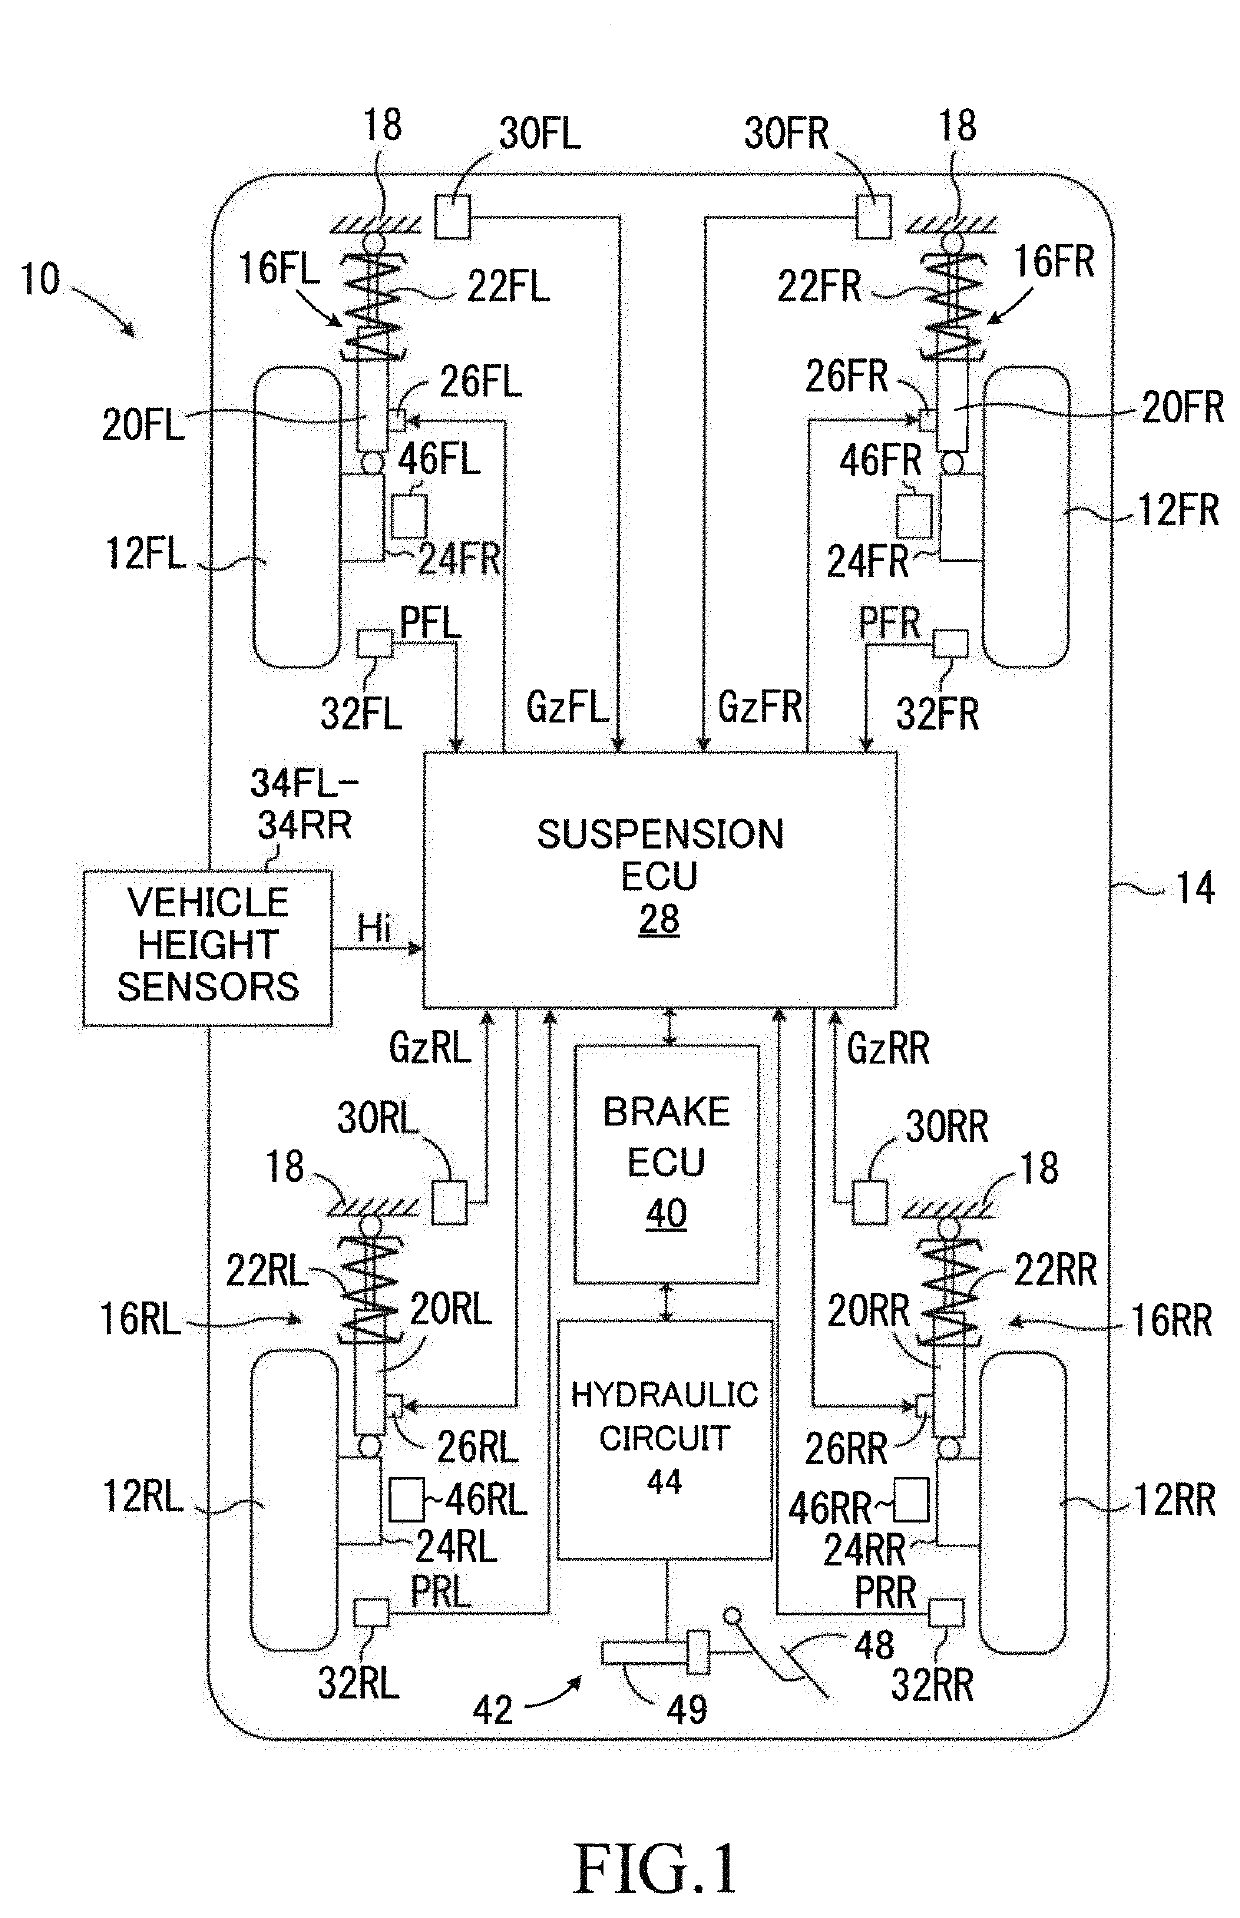 Damping force control device